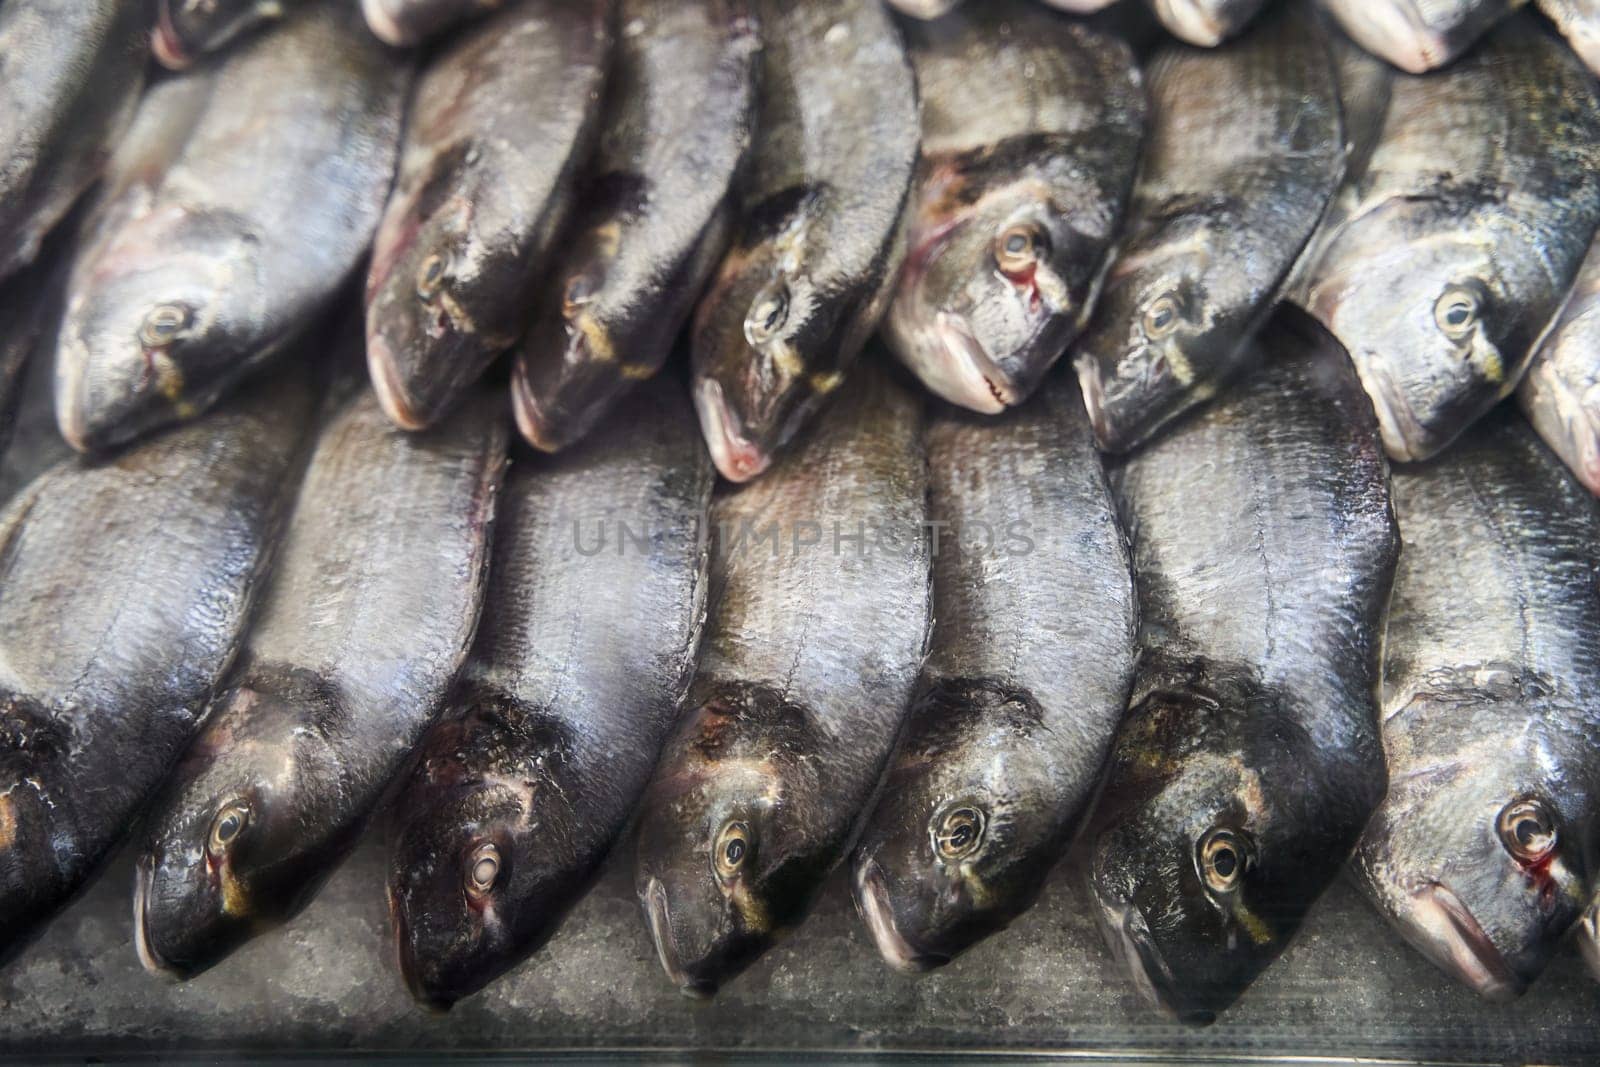 Fish stacked on ice, awaiting sale, a staple food item by driver-s